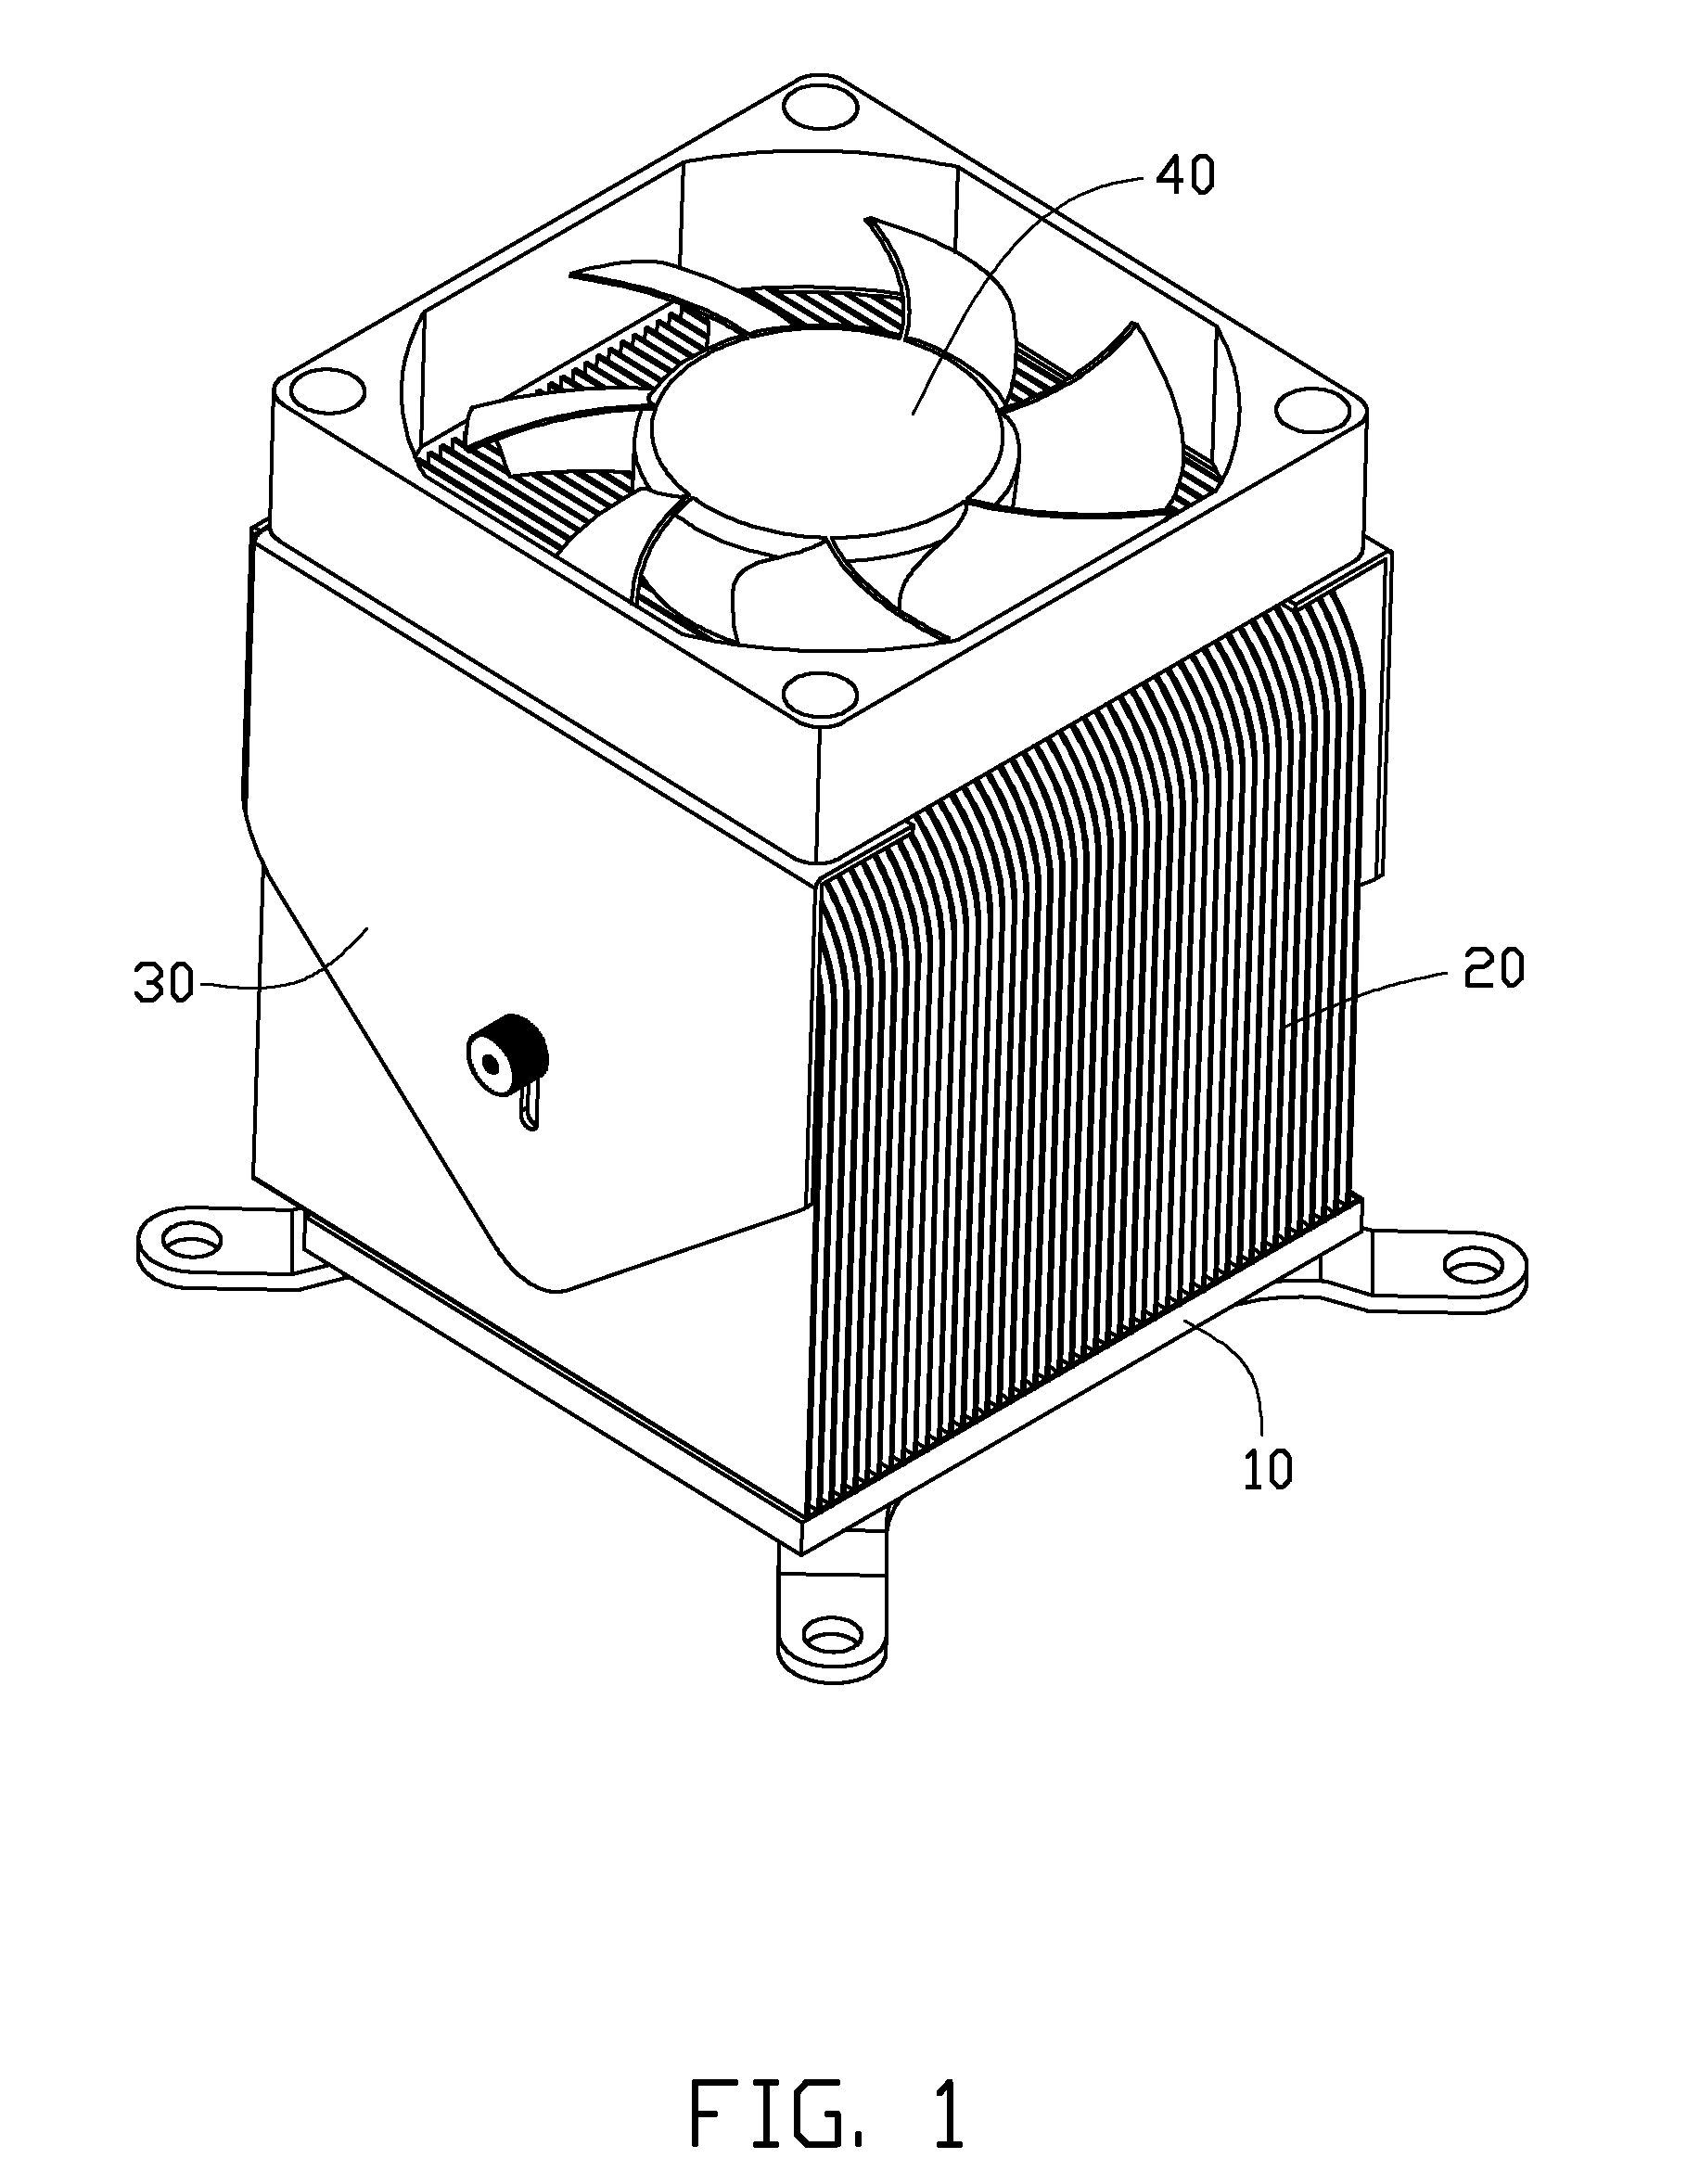 Heat dissipation device with pivotable fan